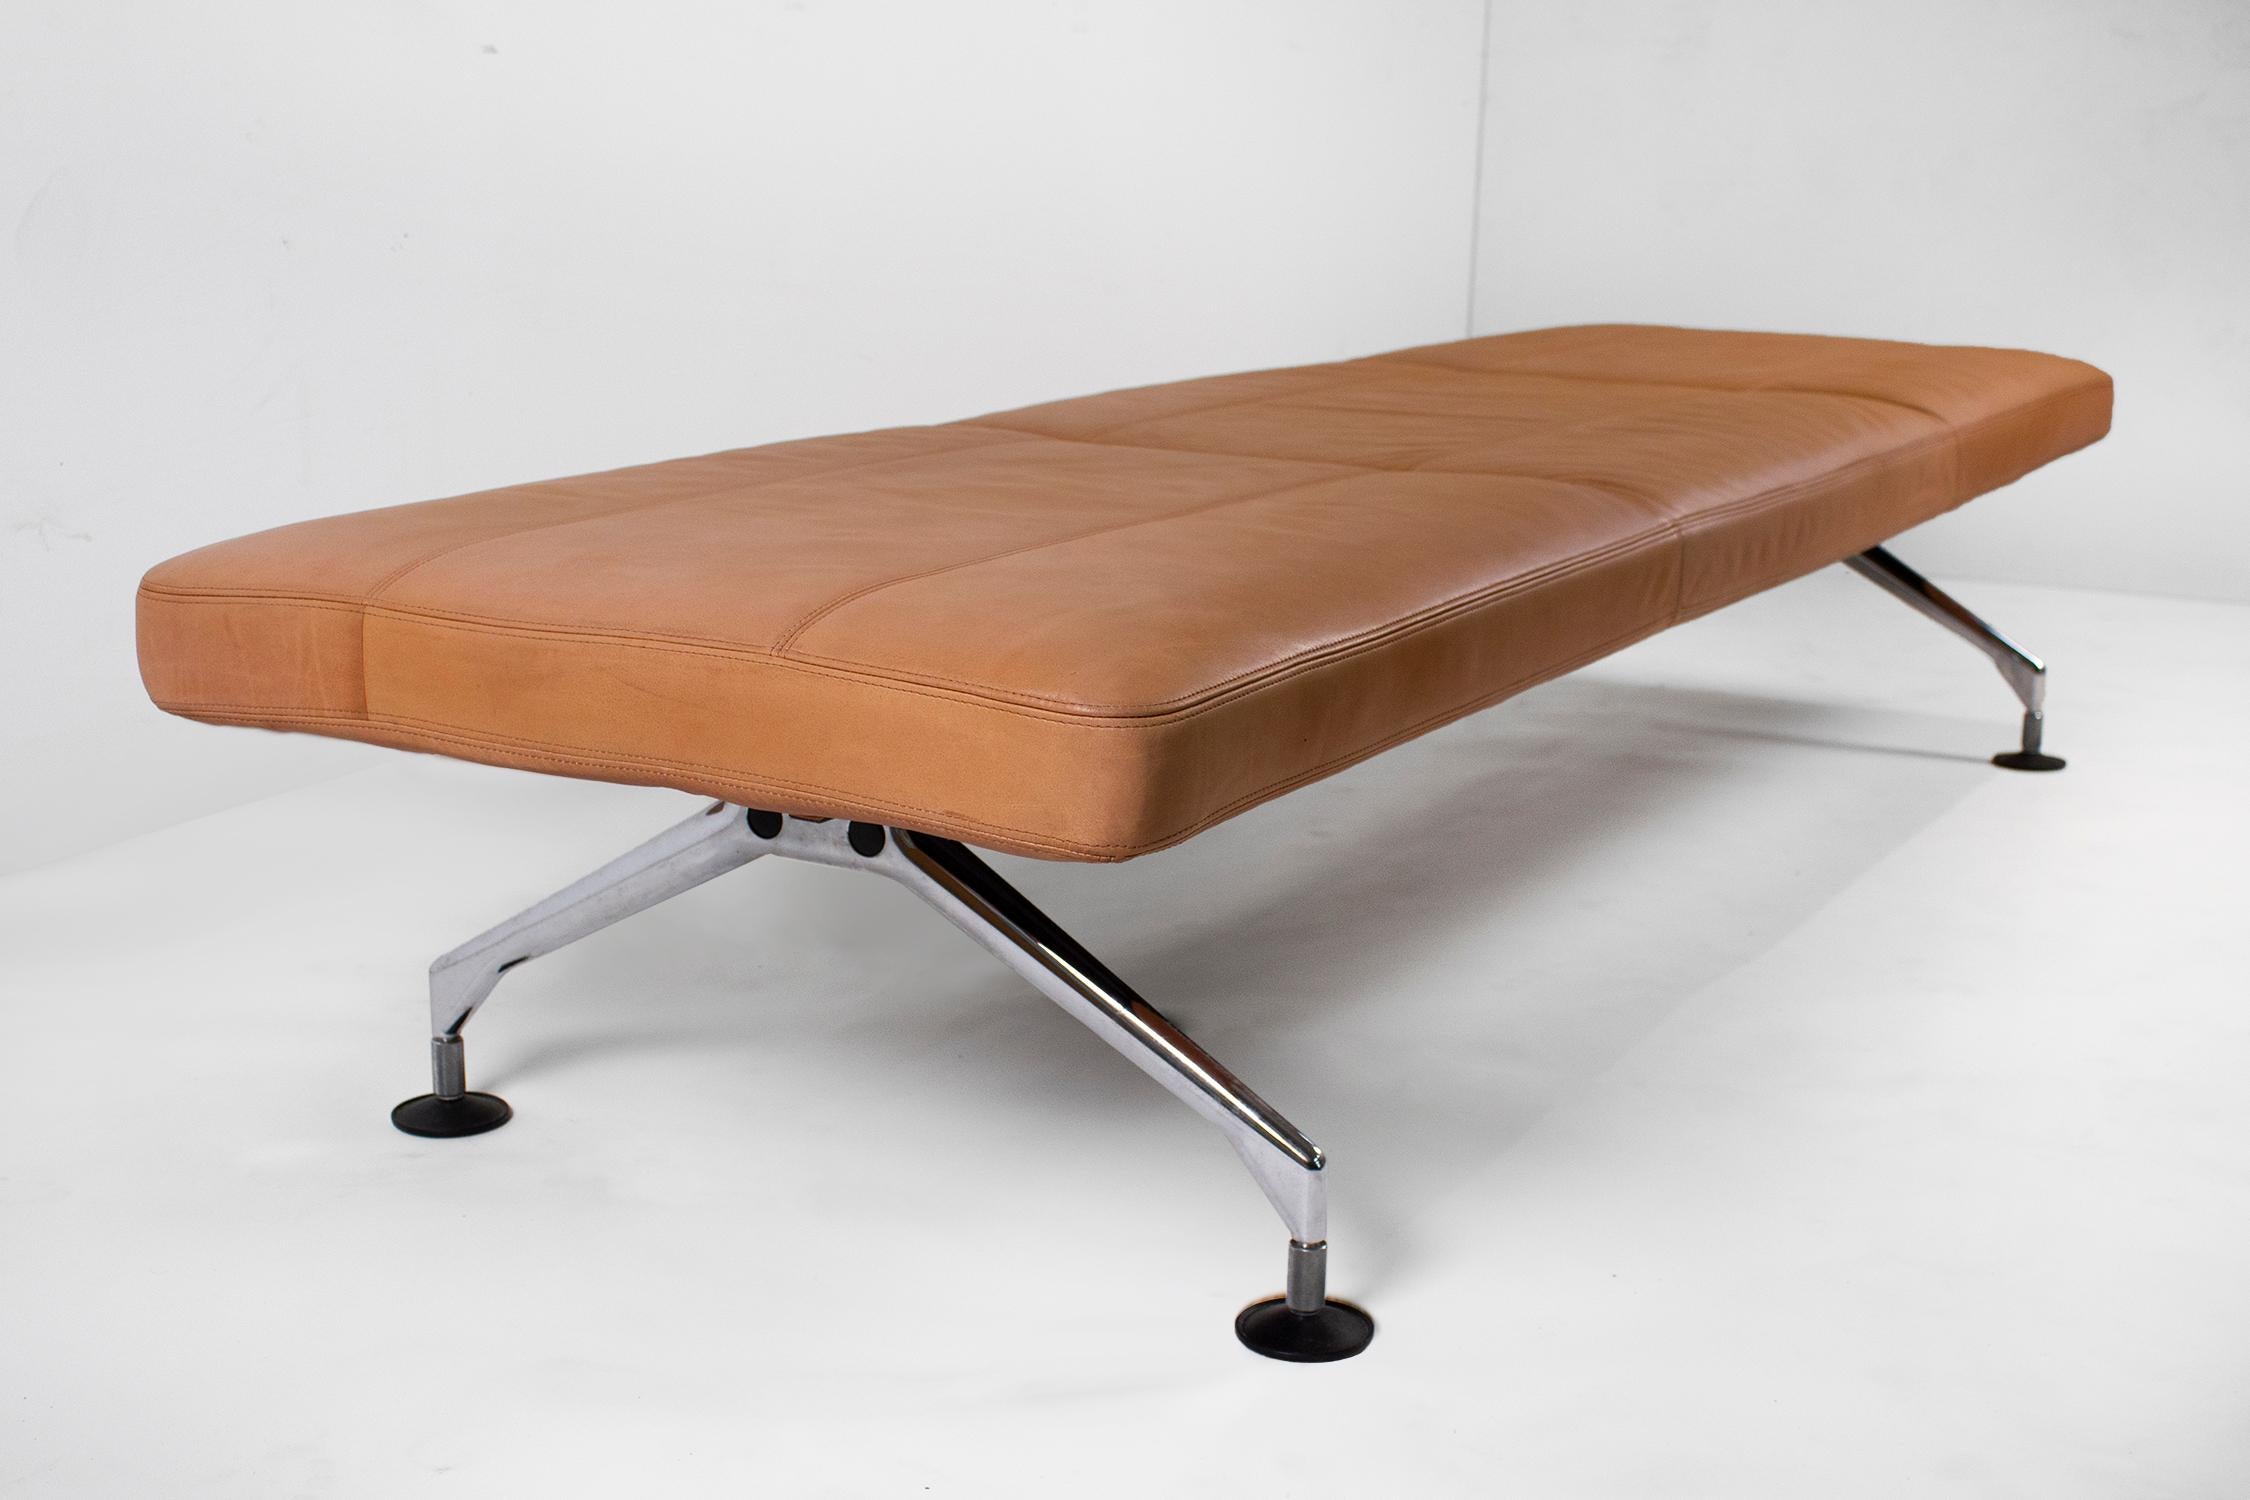 Mid-Century Modern Antonio Citterio Leather Daybed / Bench for Vitra, Germany, circa 1989